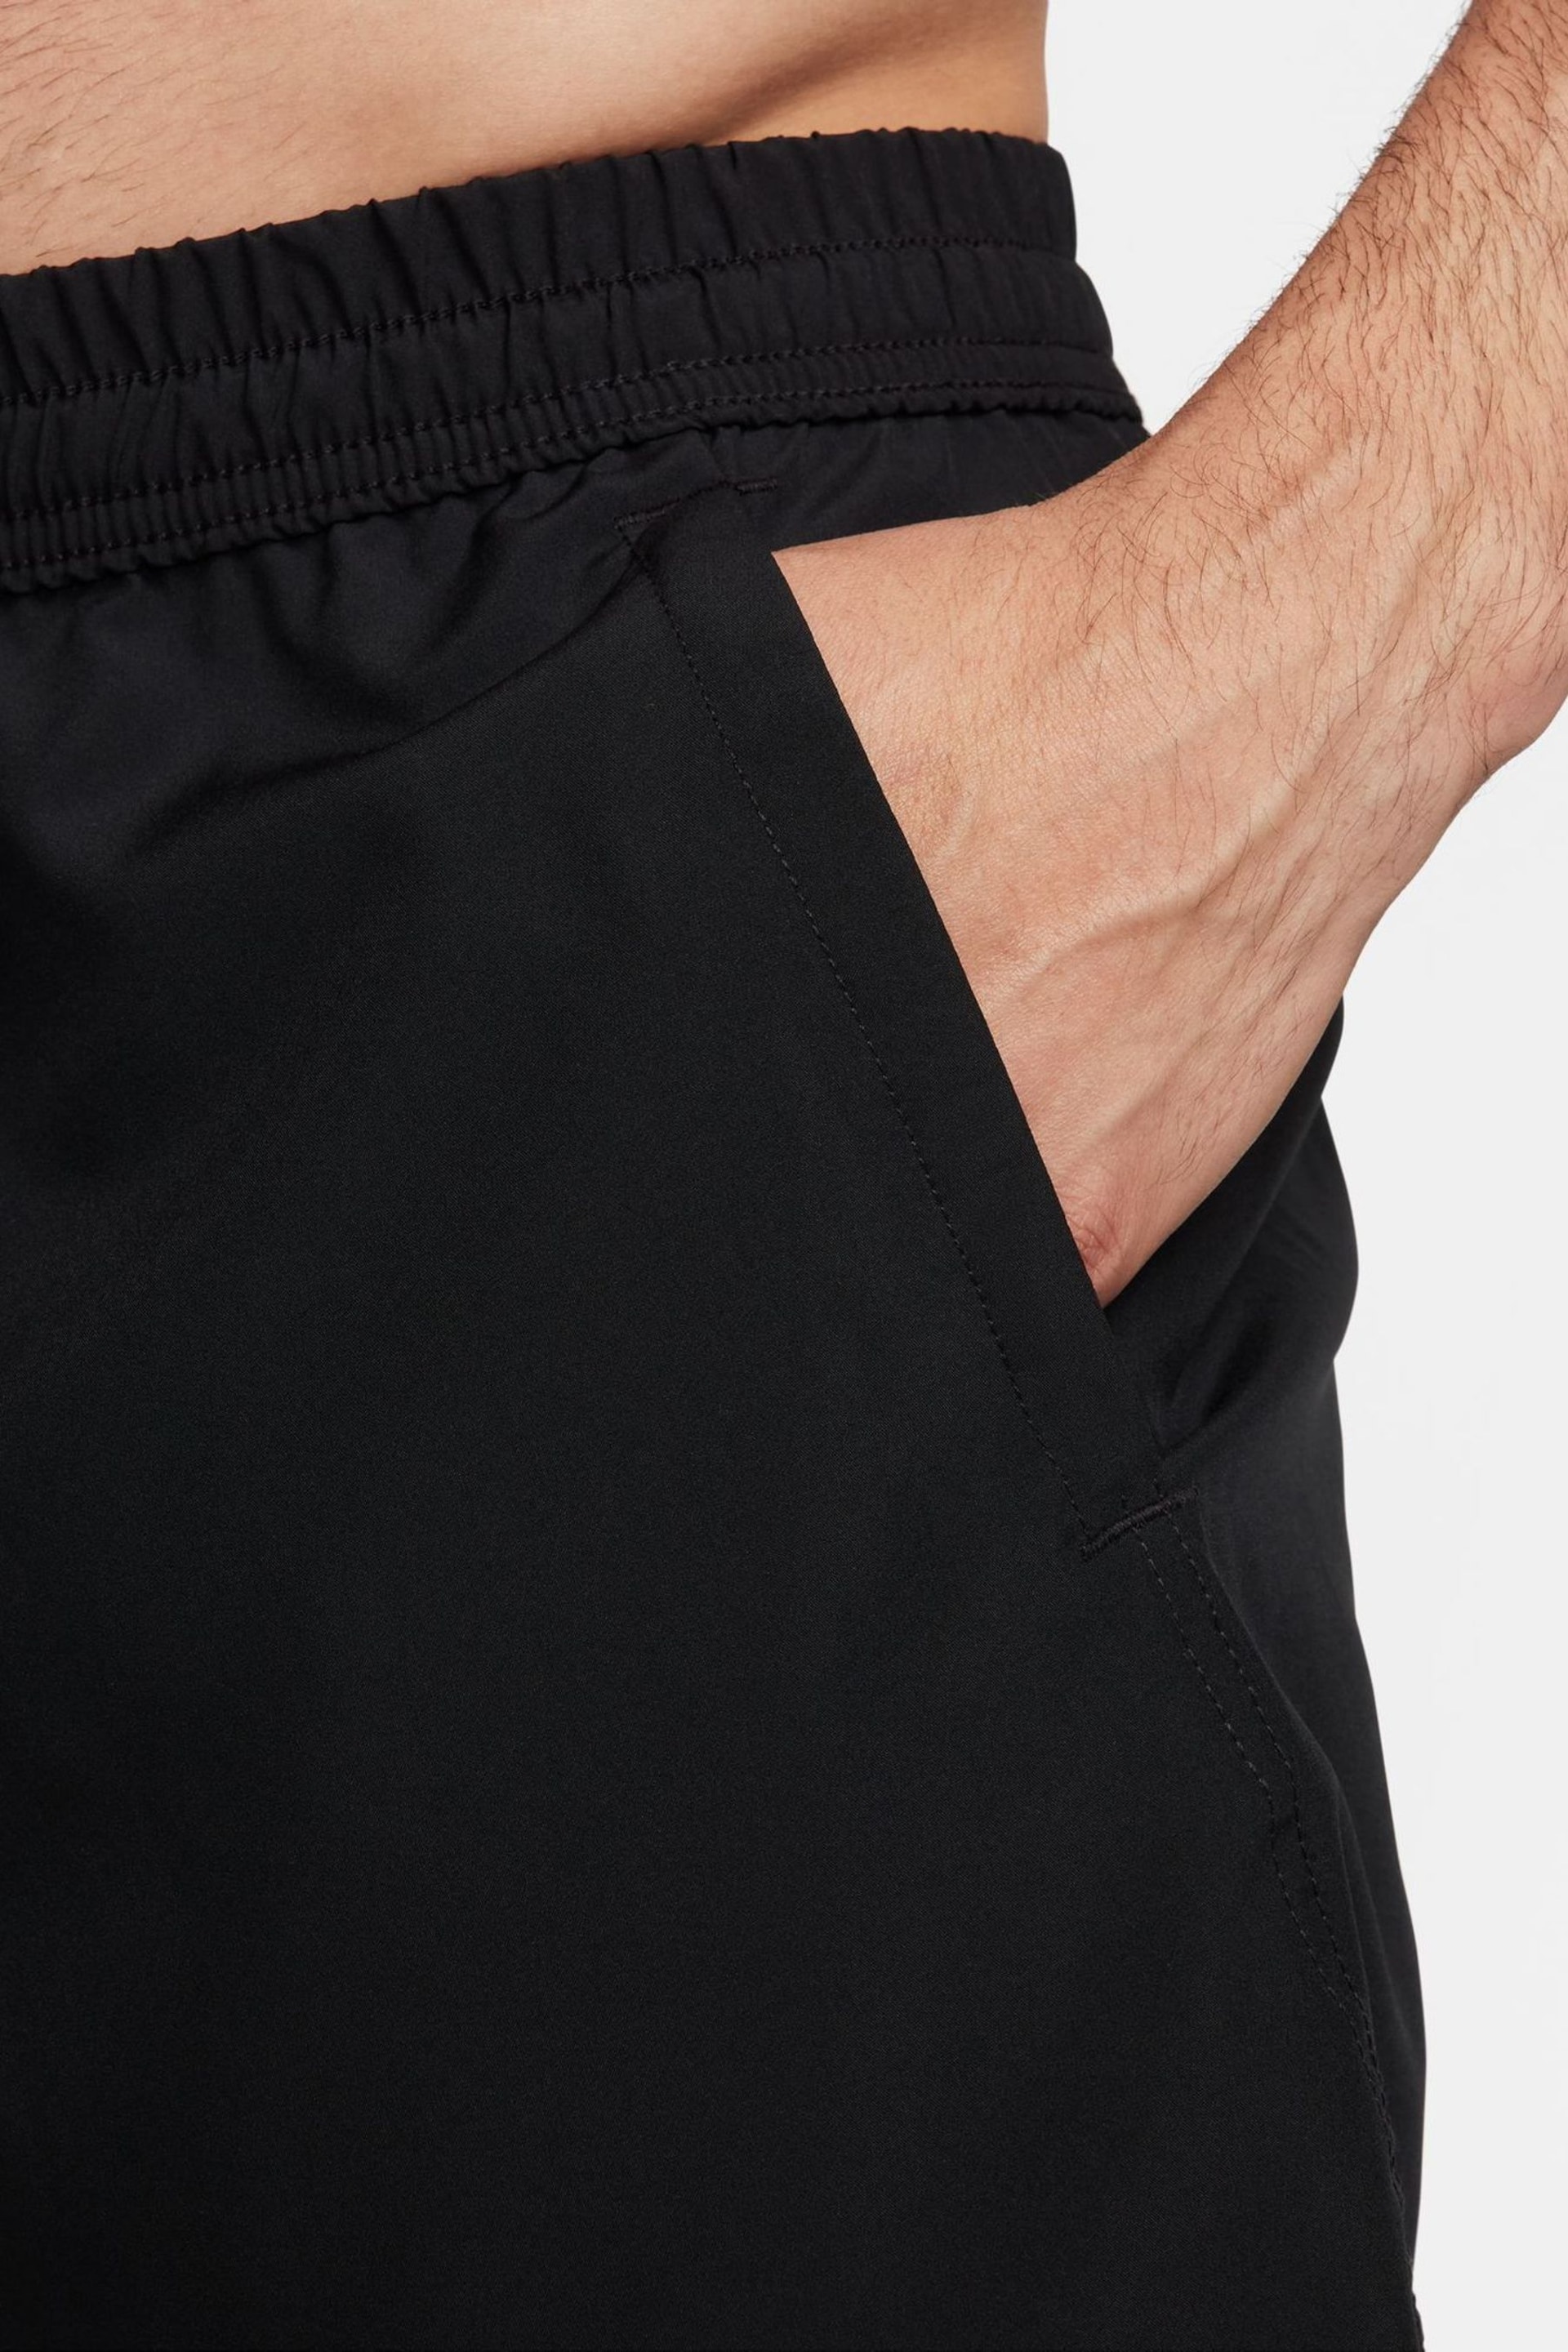 Nike Black Form Dri-FIT 9 inch Unlined Versatile Shorts - Image 6 of 7